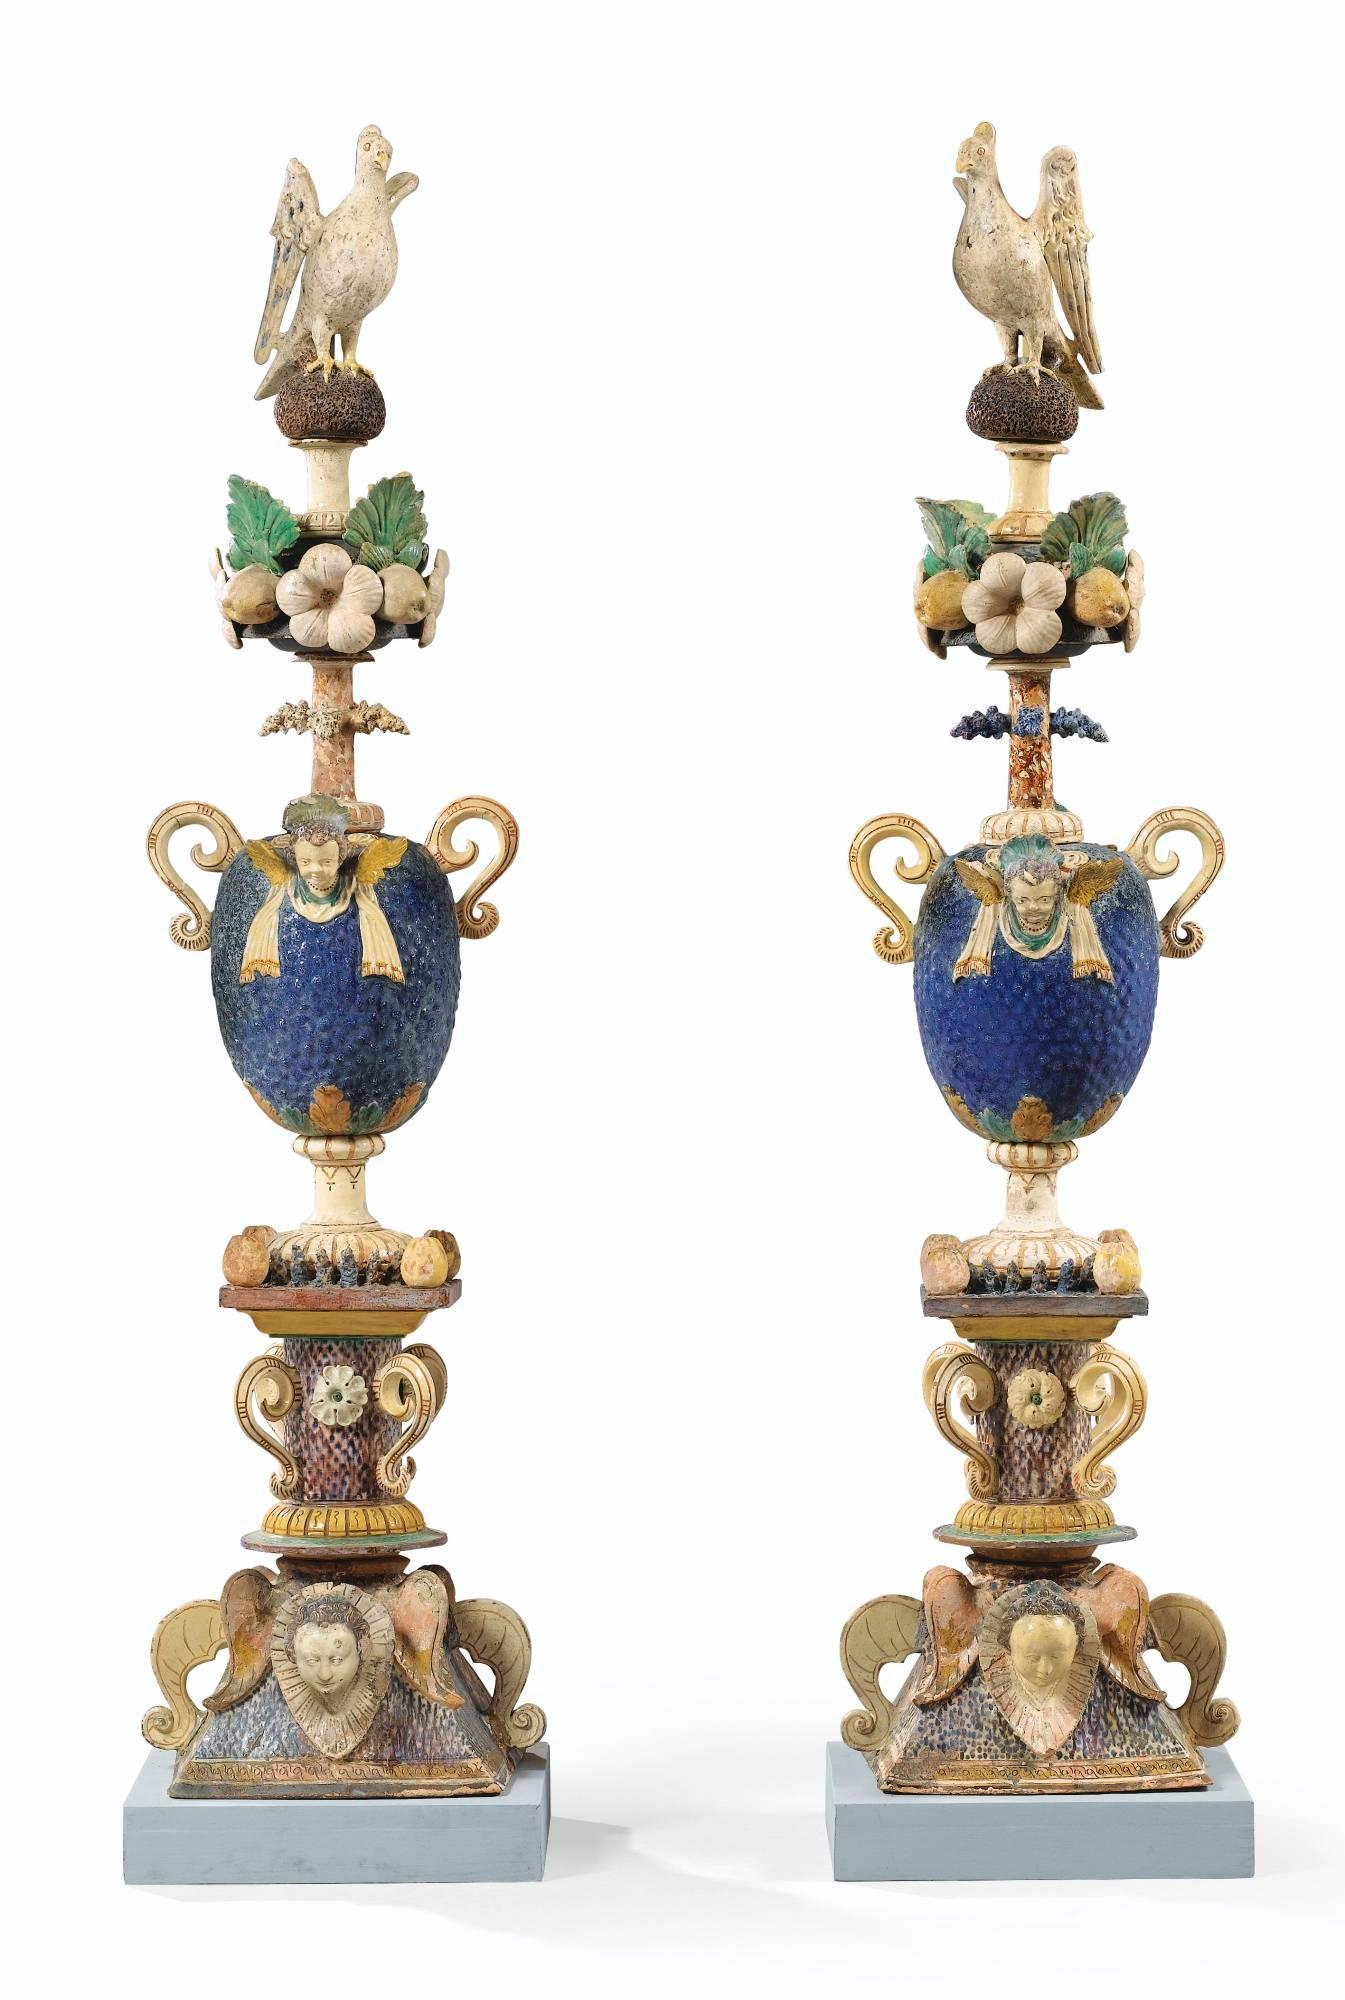 Unique pair of polychrome finials, composed of eight parts decorated with flowers, birds, leaves and faces. It was manufactured in Pré d'Auge, Normandie. 

A similar Item is exposed at the Musée de la Renaissance and at the Petit Palais in Paris.